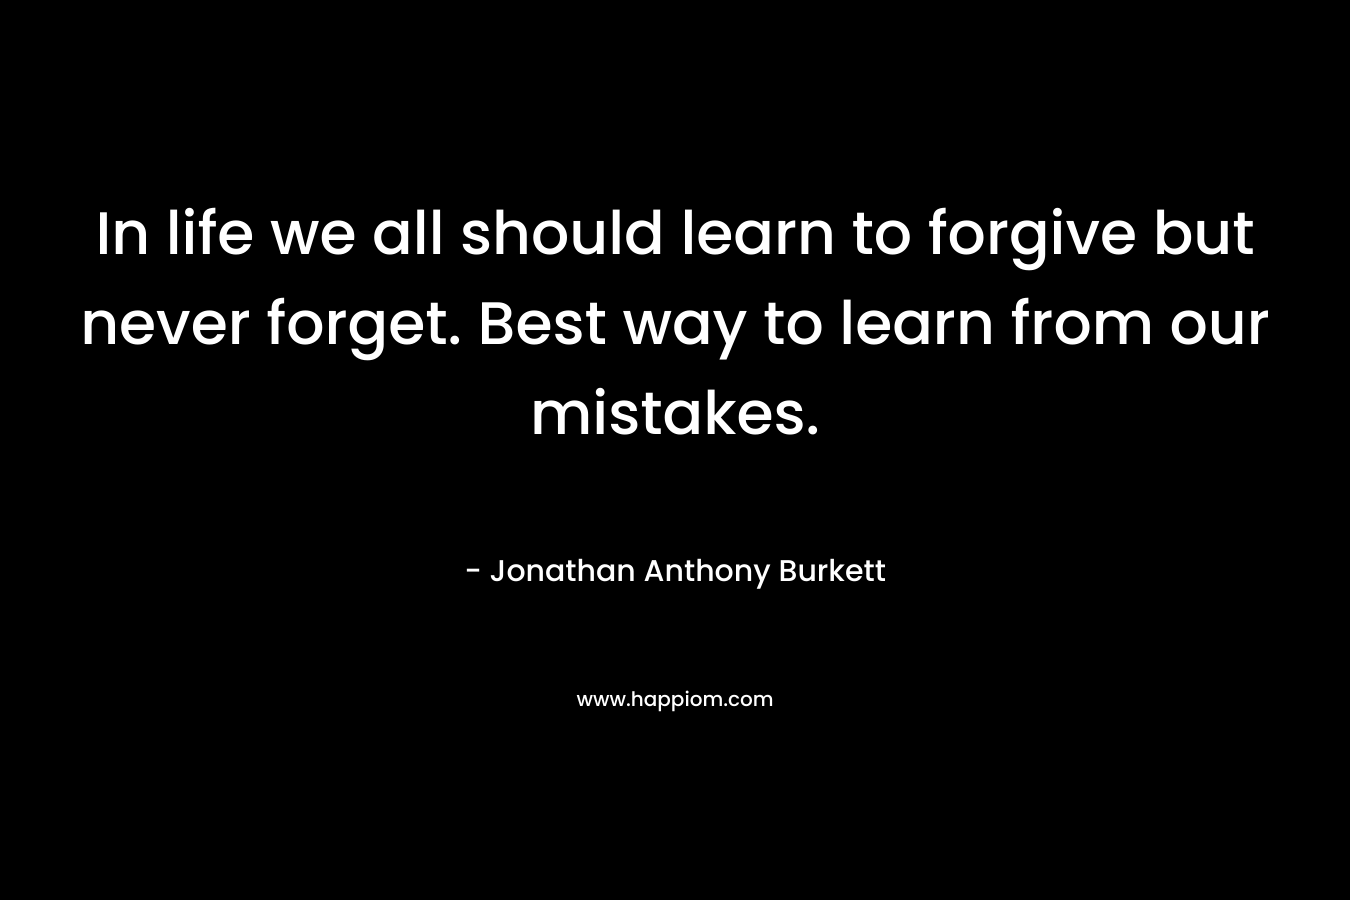 In life we all should learn to forgive but never forget. Best way to learn from our mistakes. – Jonathan Anthony Burkett